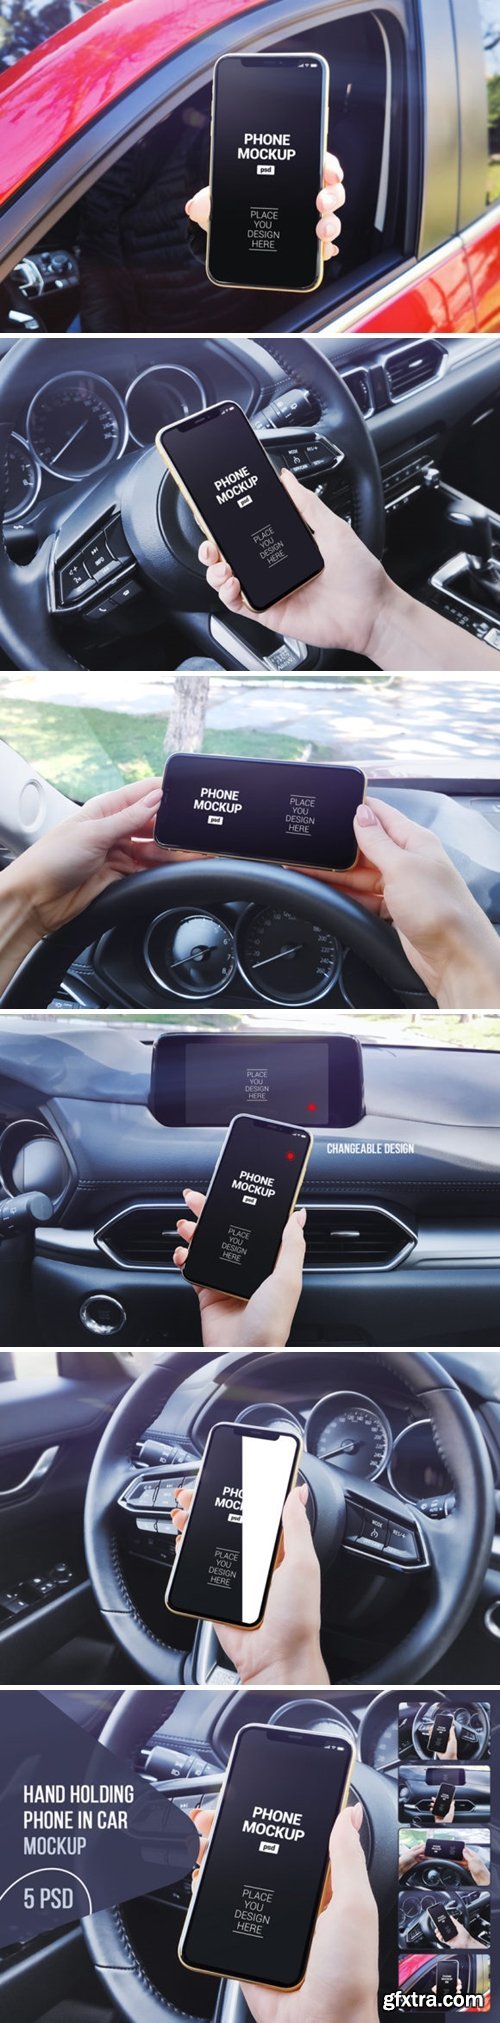 Hand Holding Phone in Car Mockup